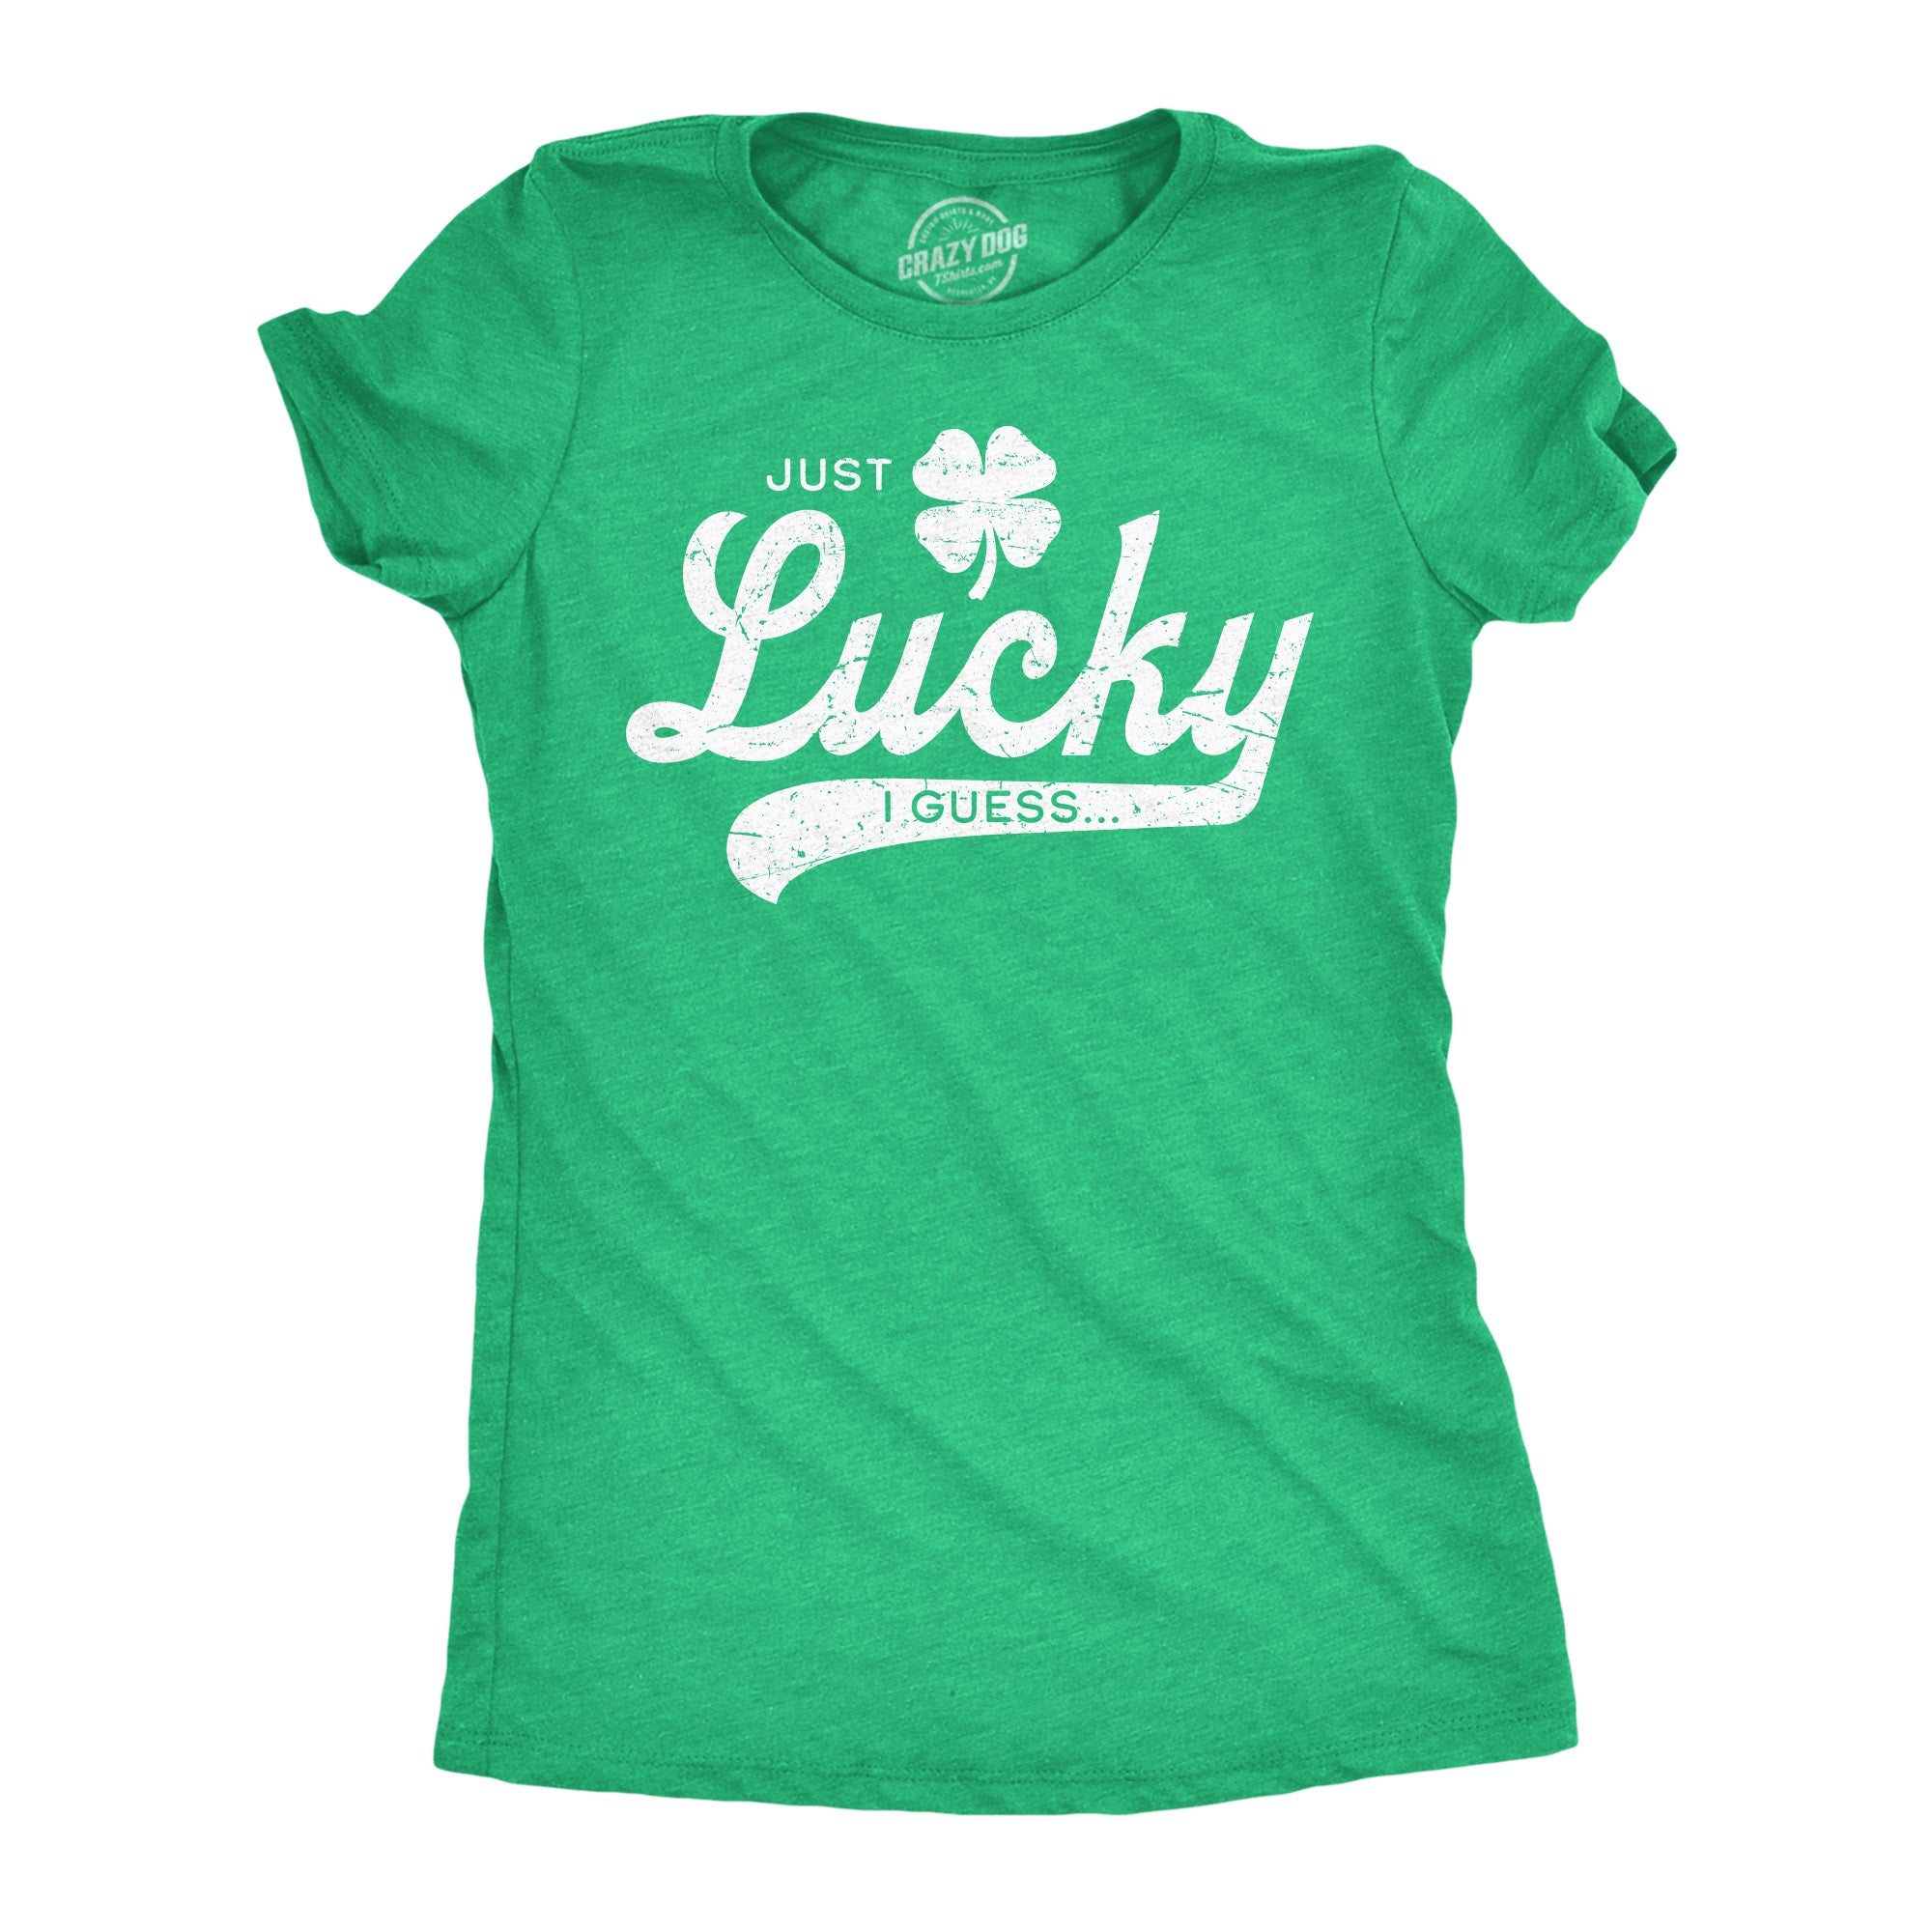 Funny Heather Green - Just Lucky I Guess Just Lucky I Guess Womens T Shirt Nerdy Saint Patrick's Day Sarcastic Tee